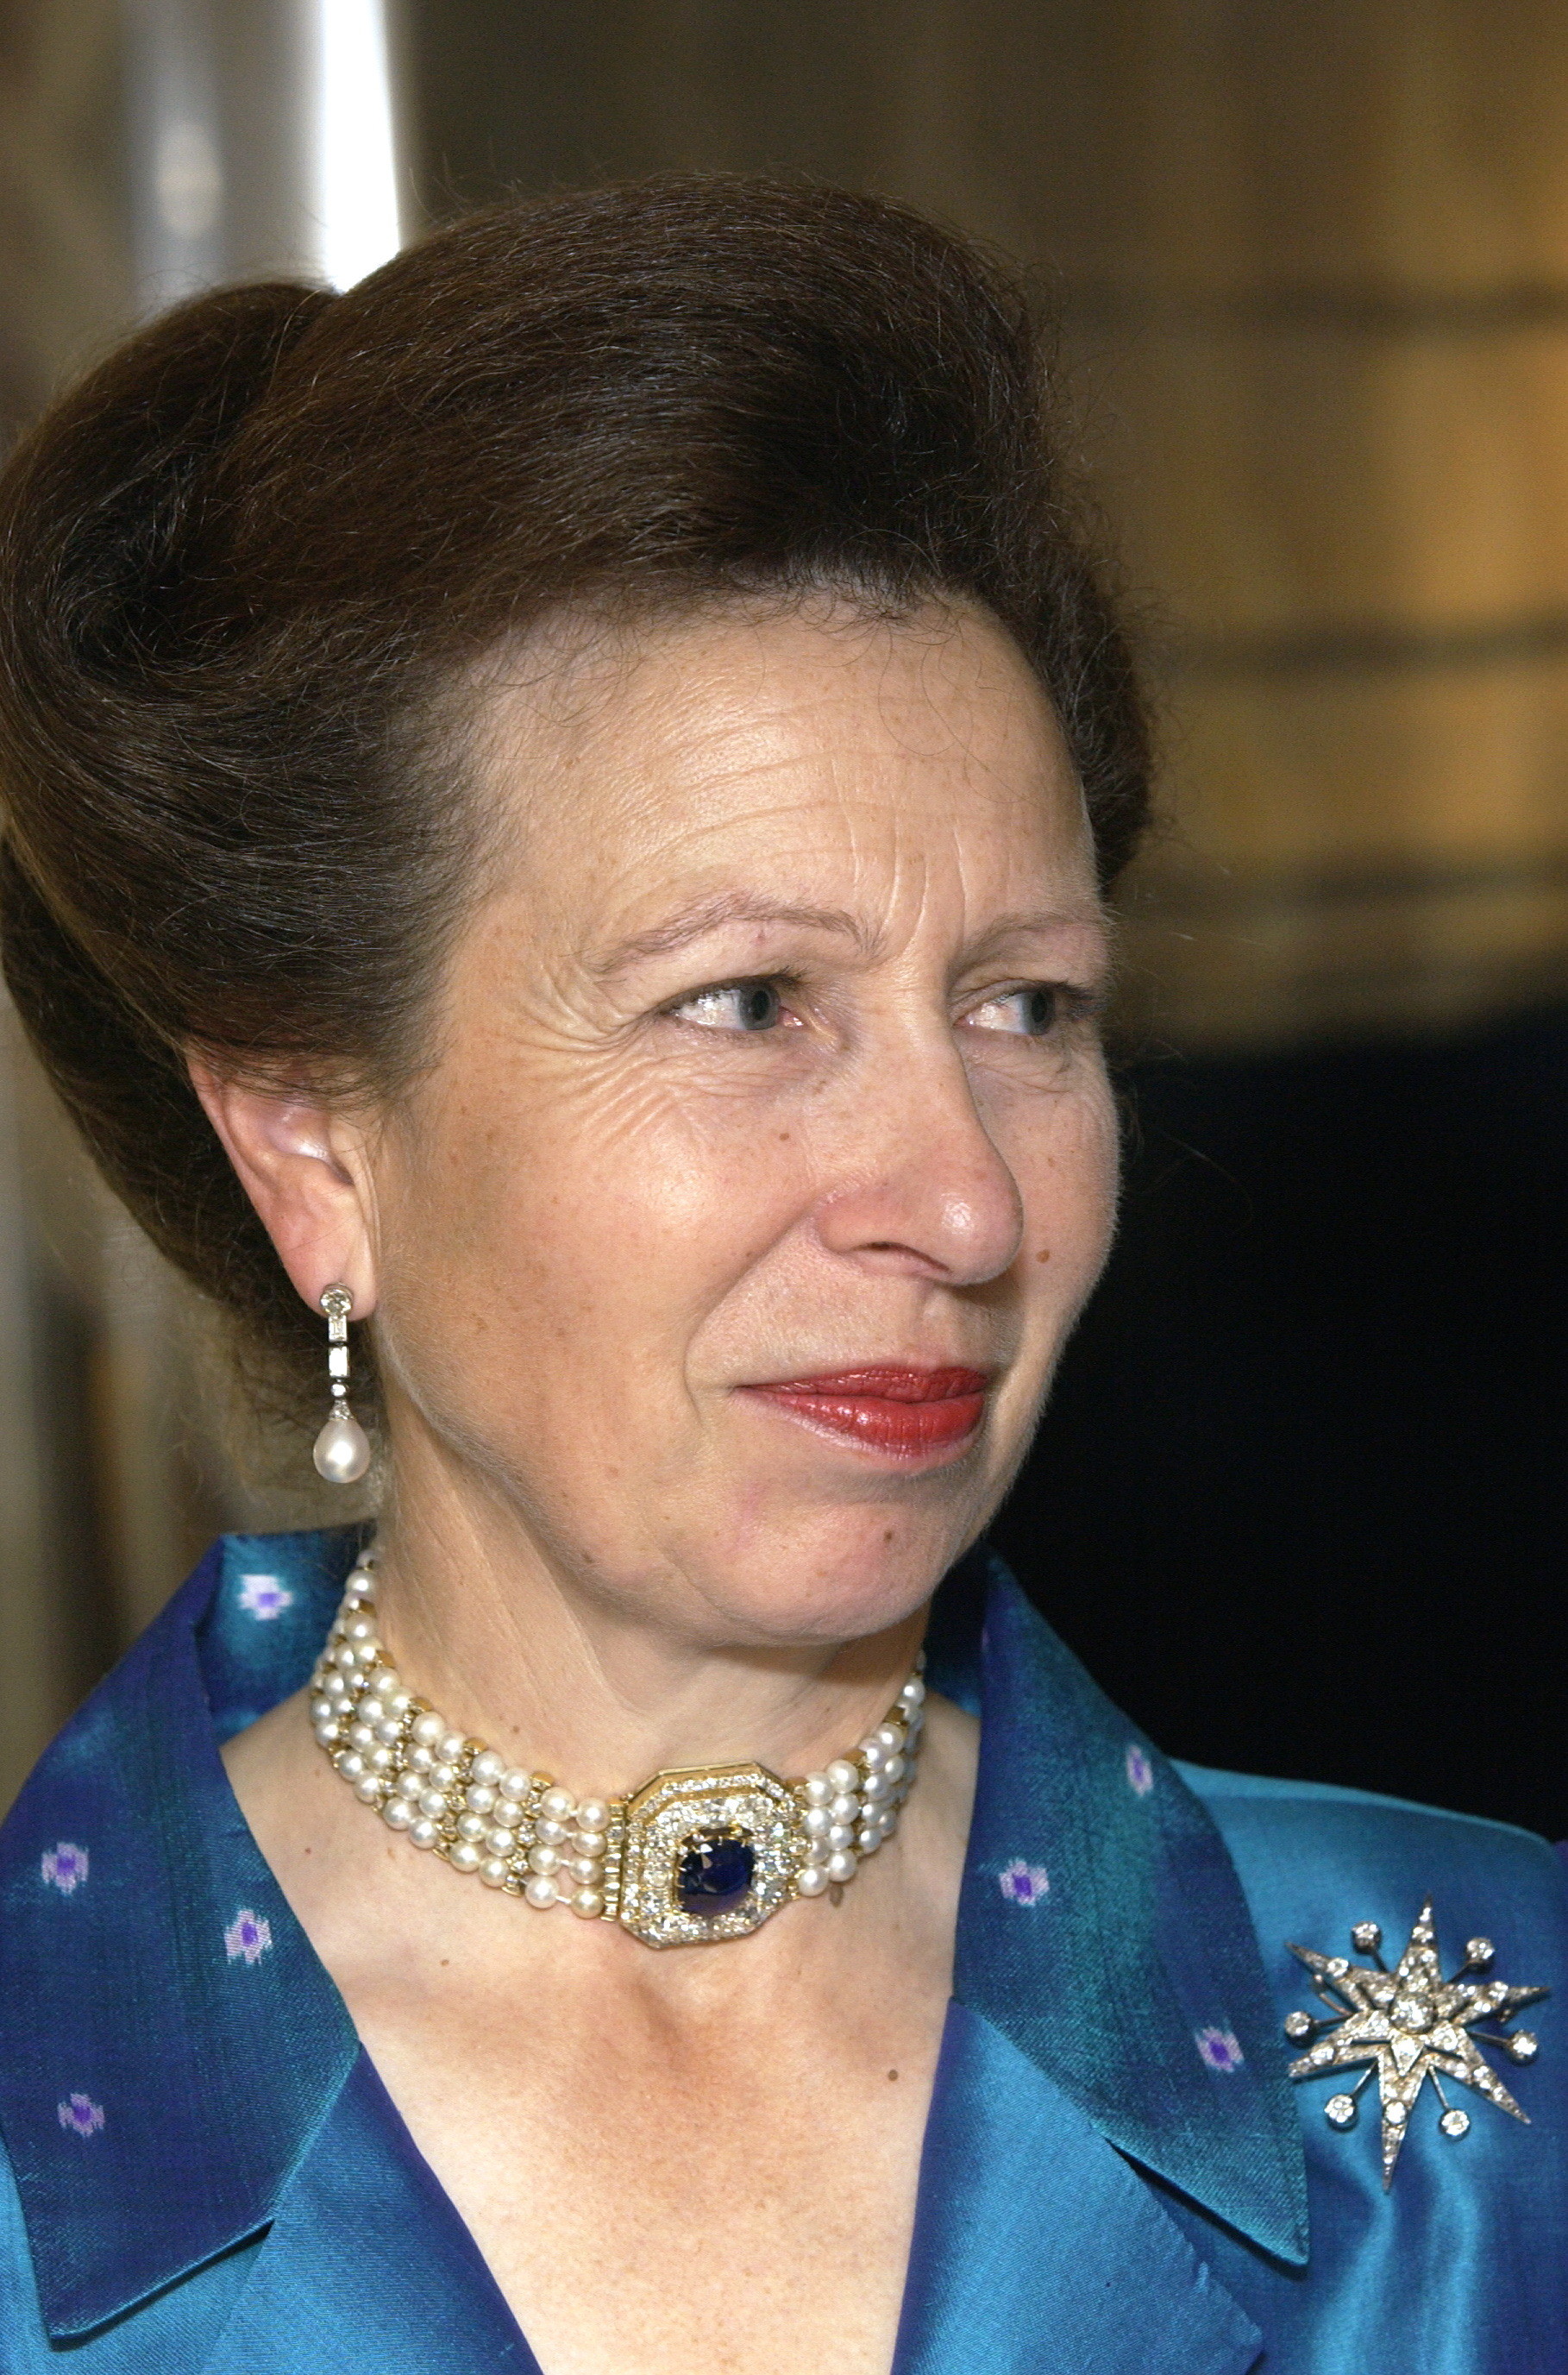 Anne, the Princess Royal, wearing the choker that supposedly came from the Marie Feodorovna's collection.